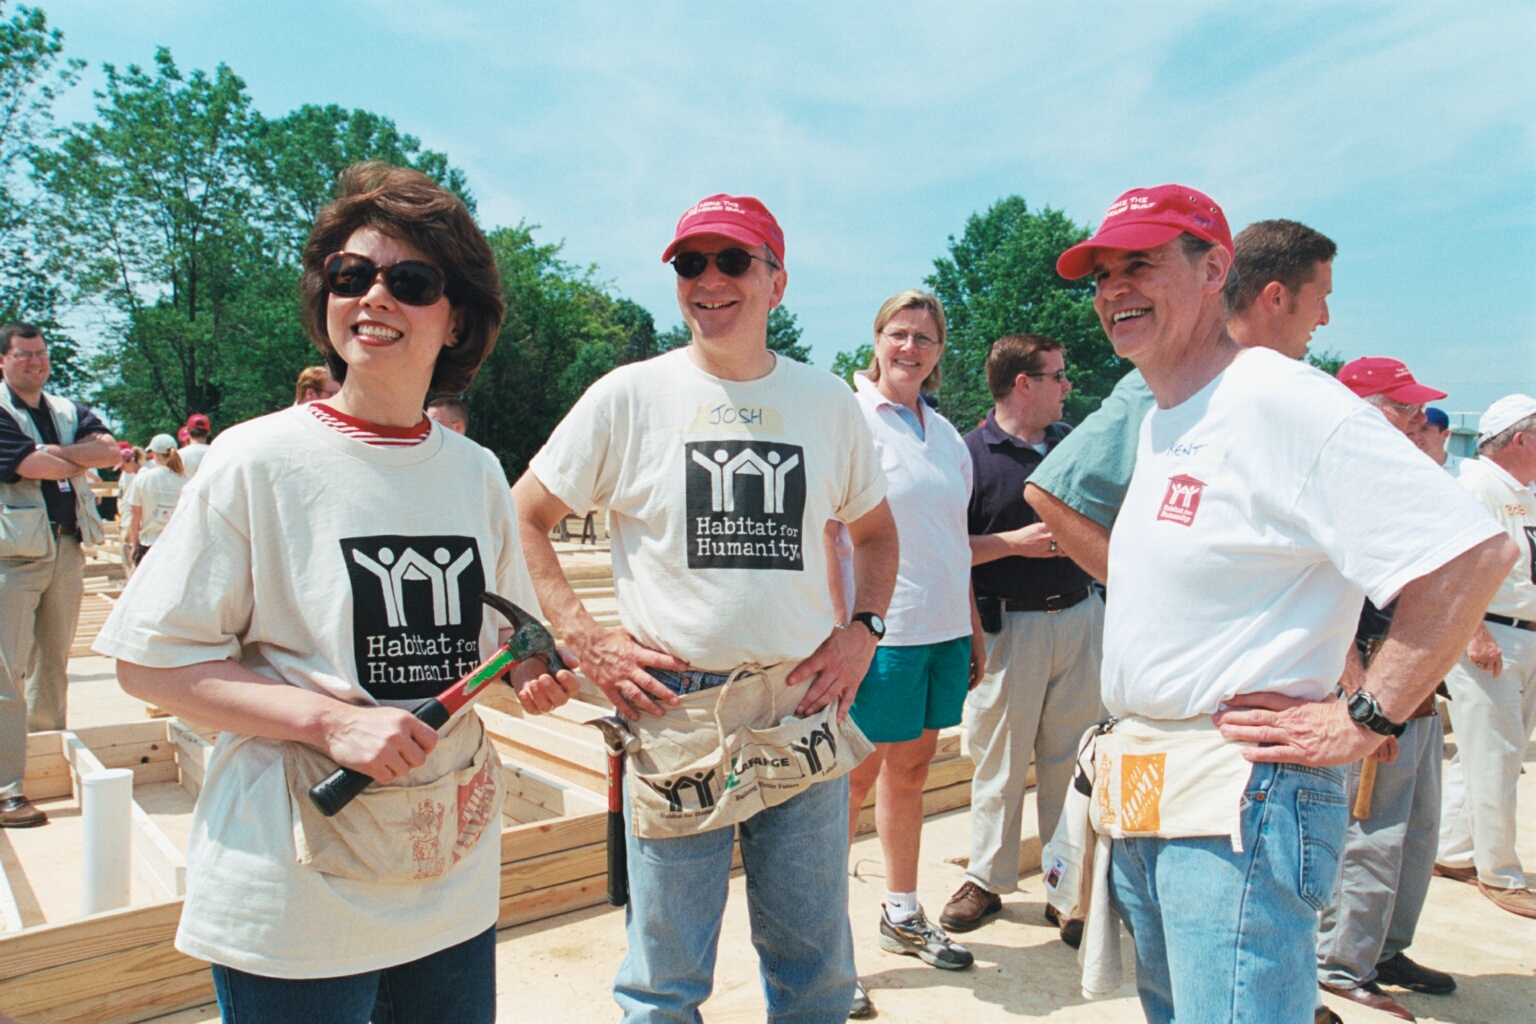 Secretary Elaine Chao and White House Deputy Chief of Staff Josh Bolten volunteering at a Habitat for Humanity building site, Fairfax, VA.